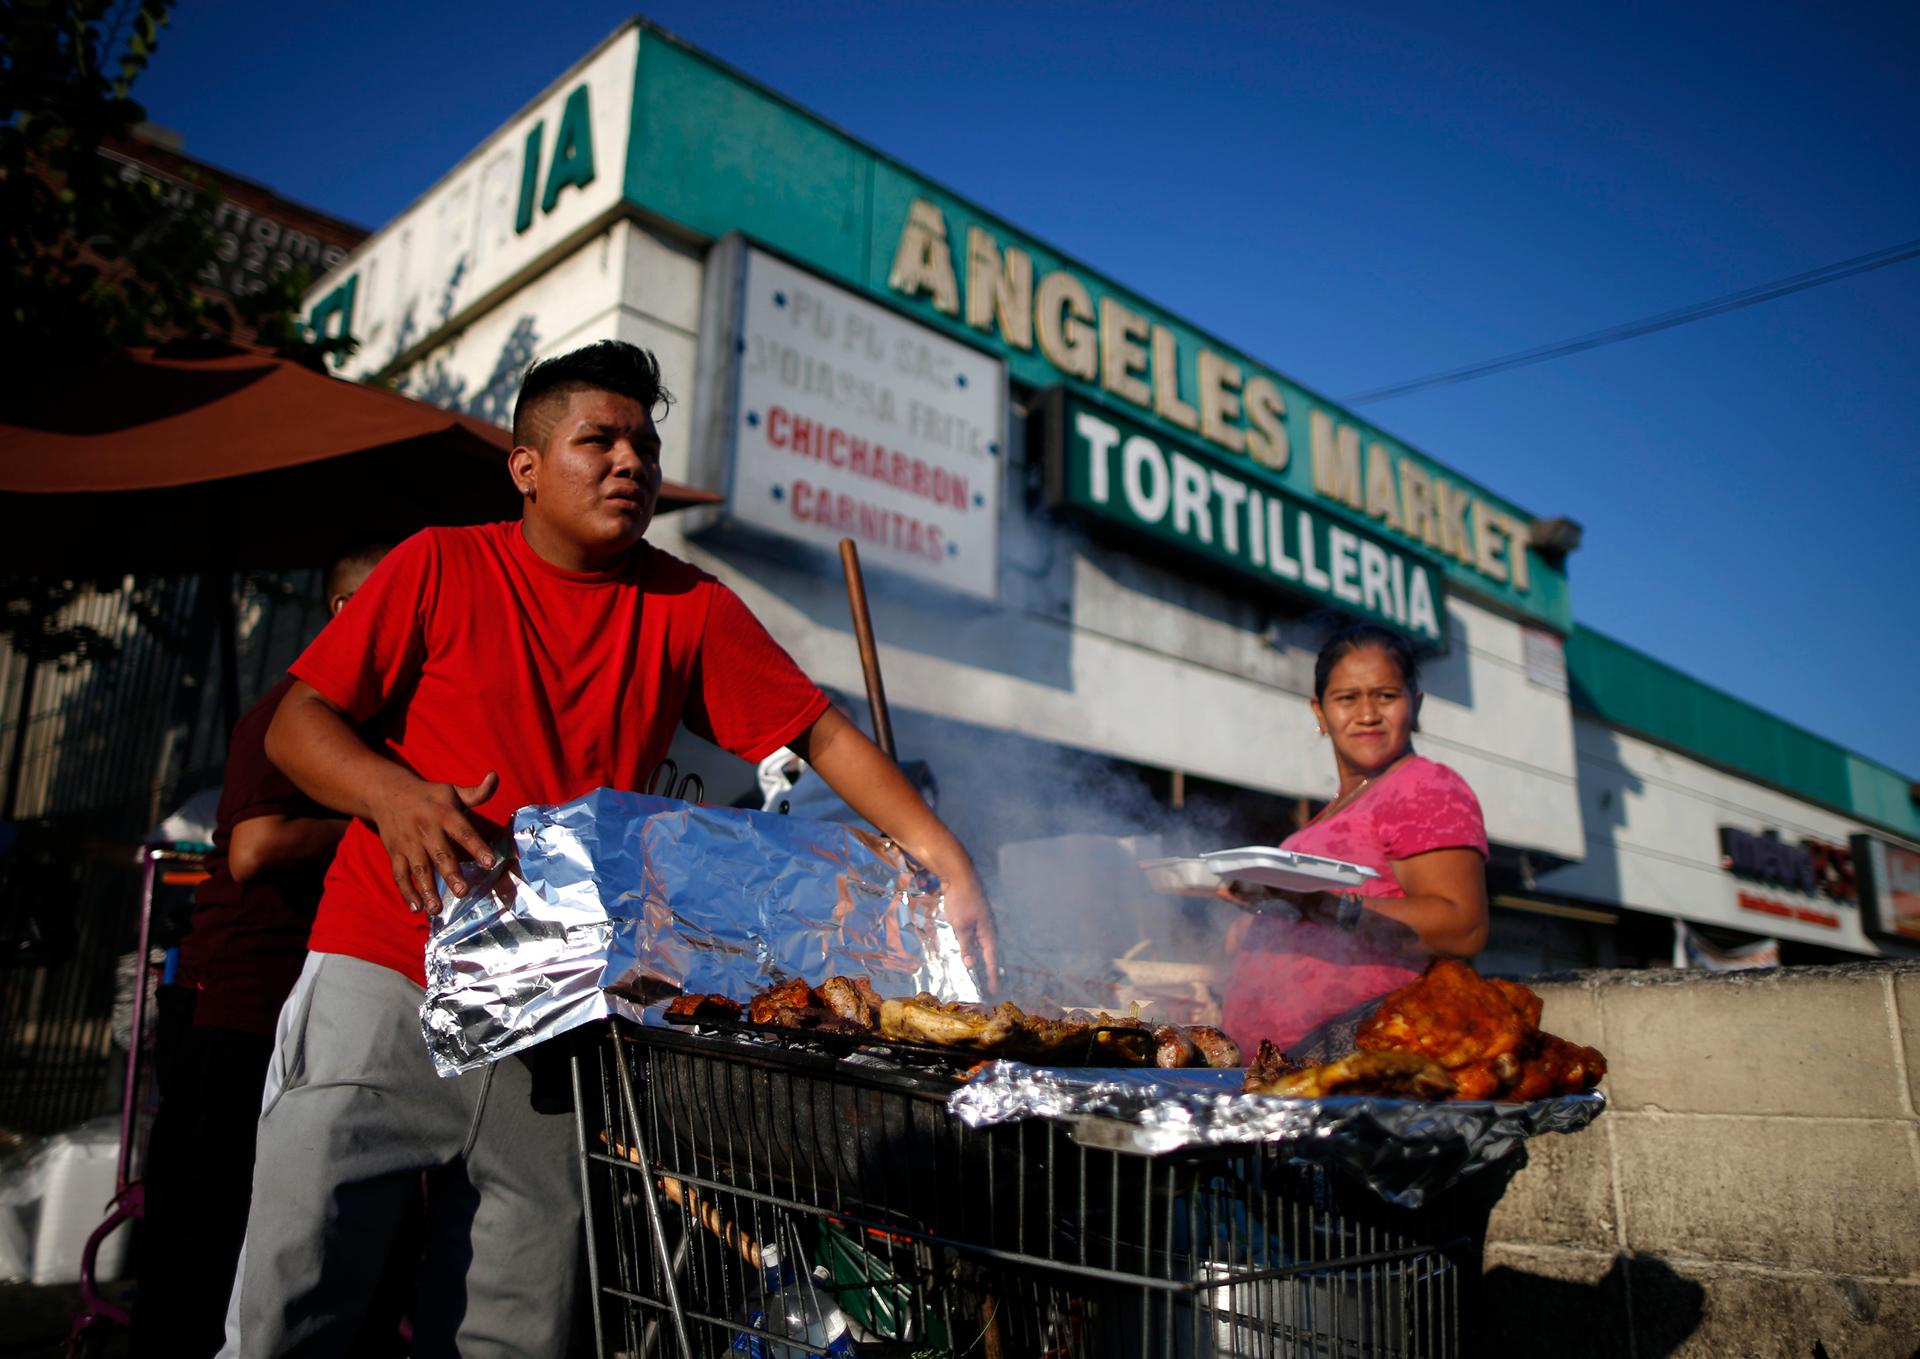 A man cooks meat in a shopping cart in the Westlake area of Los Angeles, home to many Mexican and Central American migrants, California August 6, 2014.